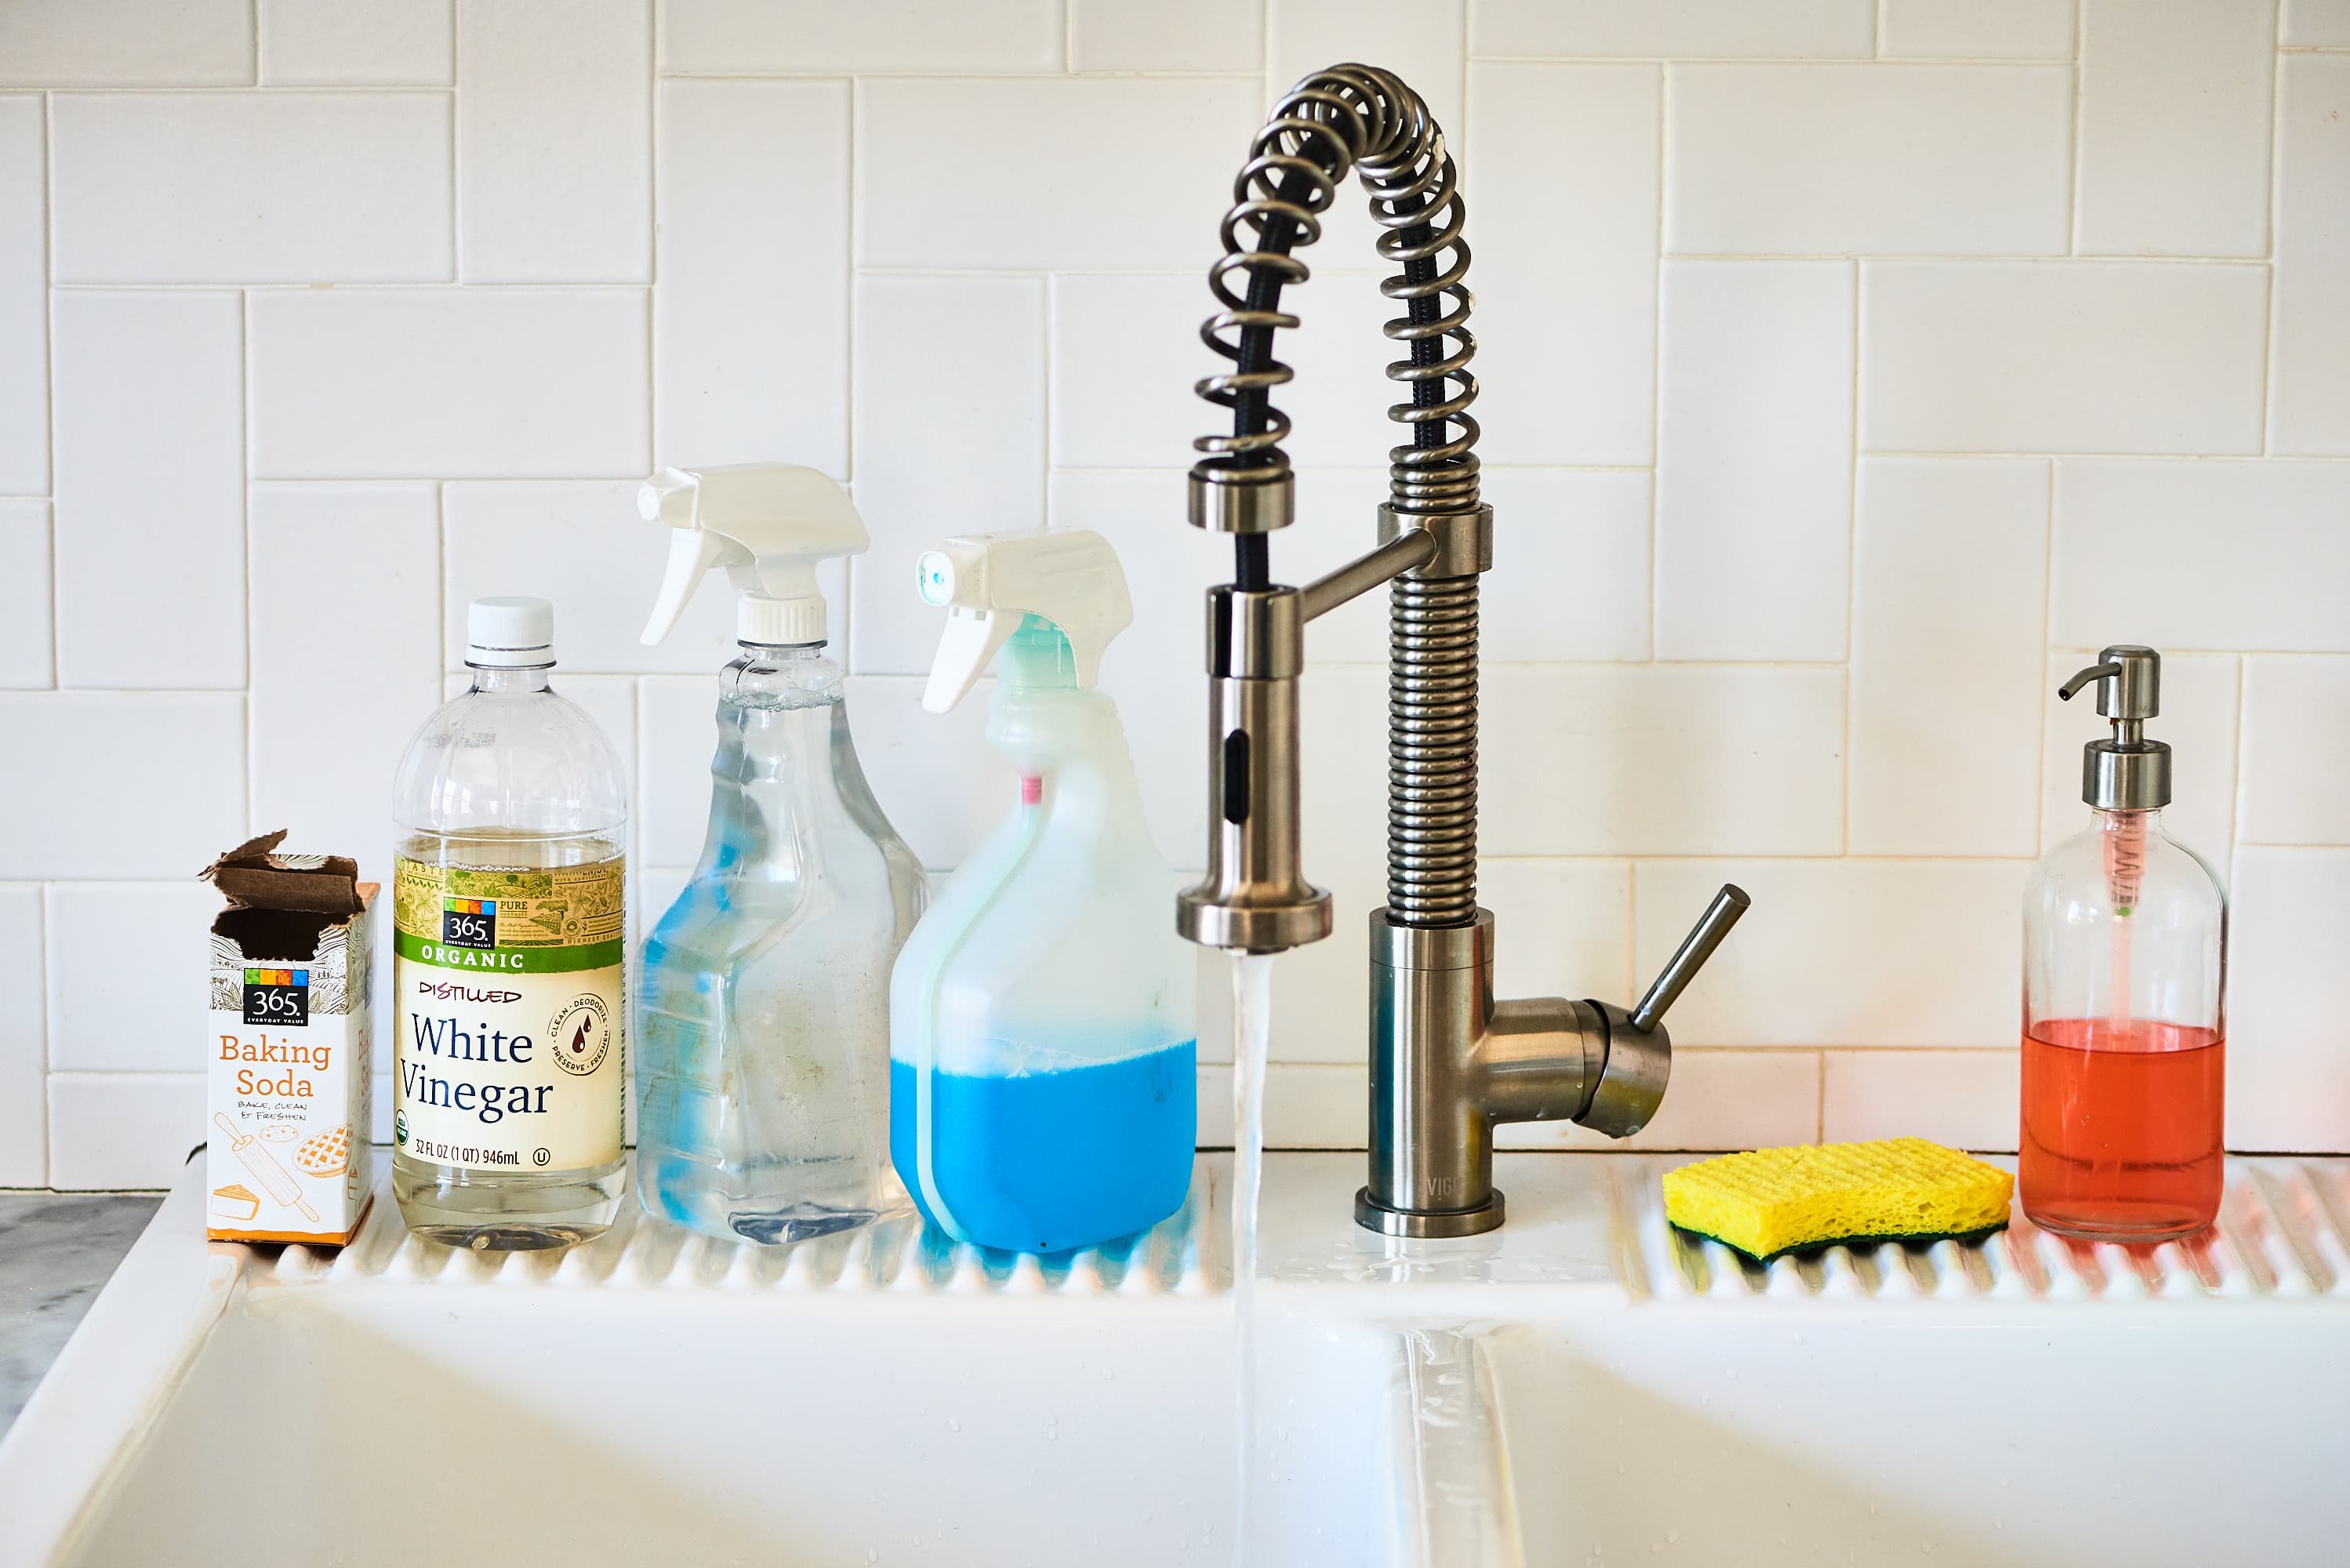 Cleaning TIP - Wash walls with sugar soap and warm water with a